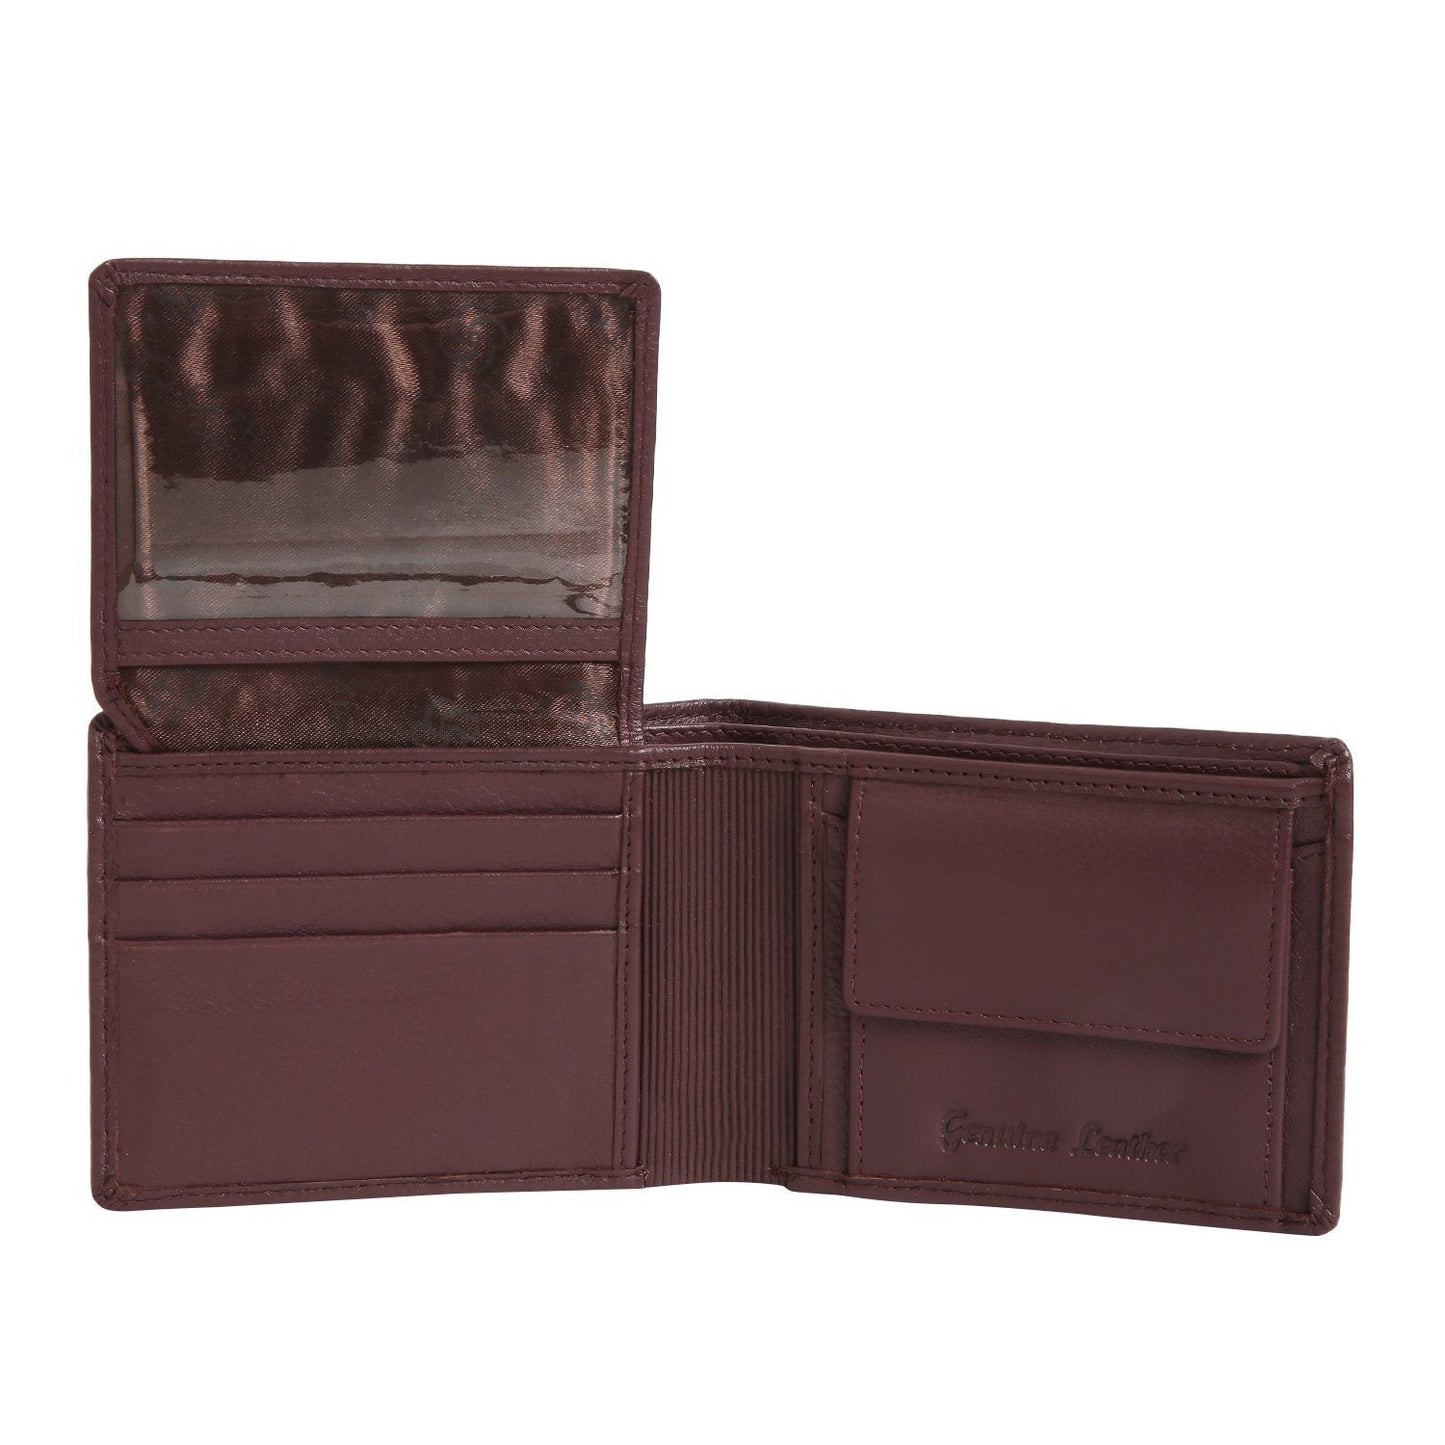 Brown Colour Bi-Fold Italian Leather Slim Wallet (8 Card Slot + 2 Hidden Compartment + 1 ID Slot + Coin Pocket + Cash Compartment) Cathy London 